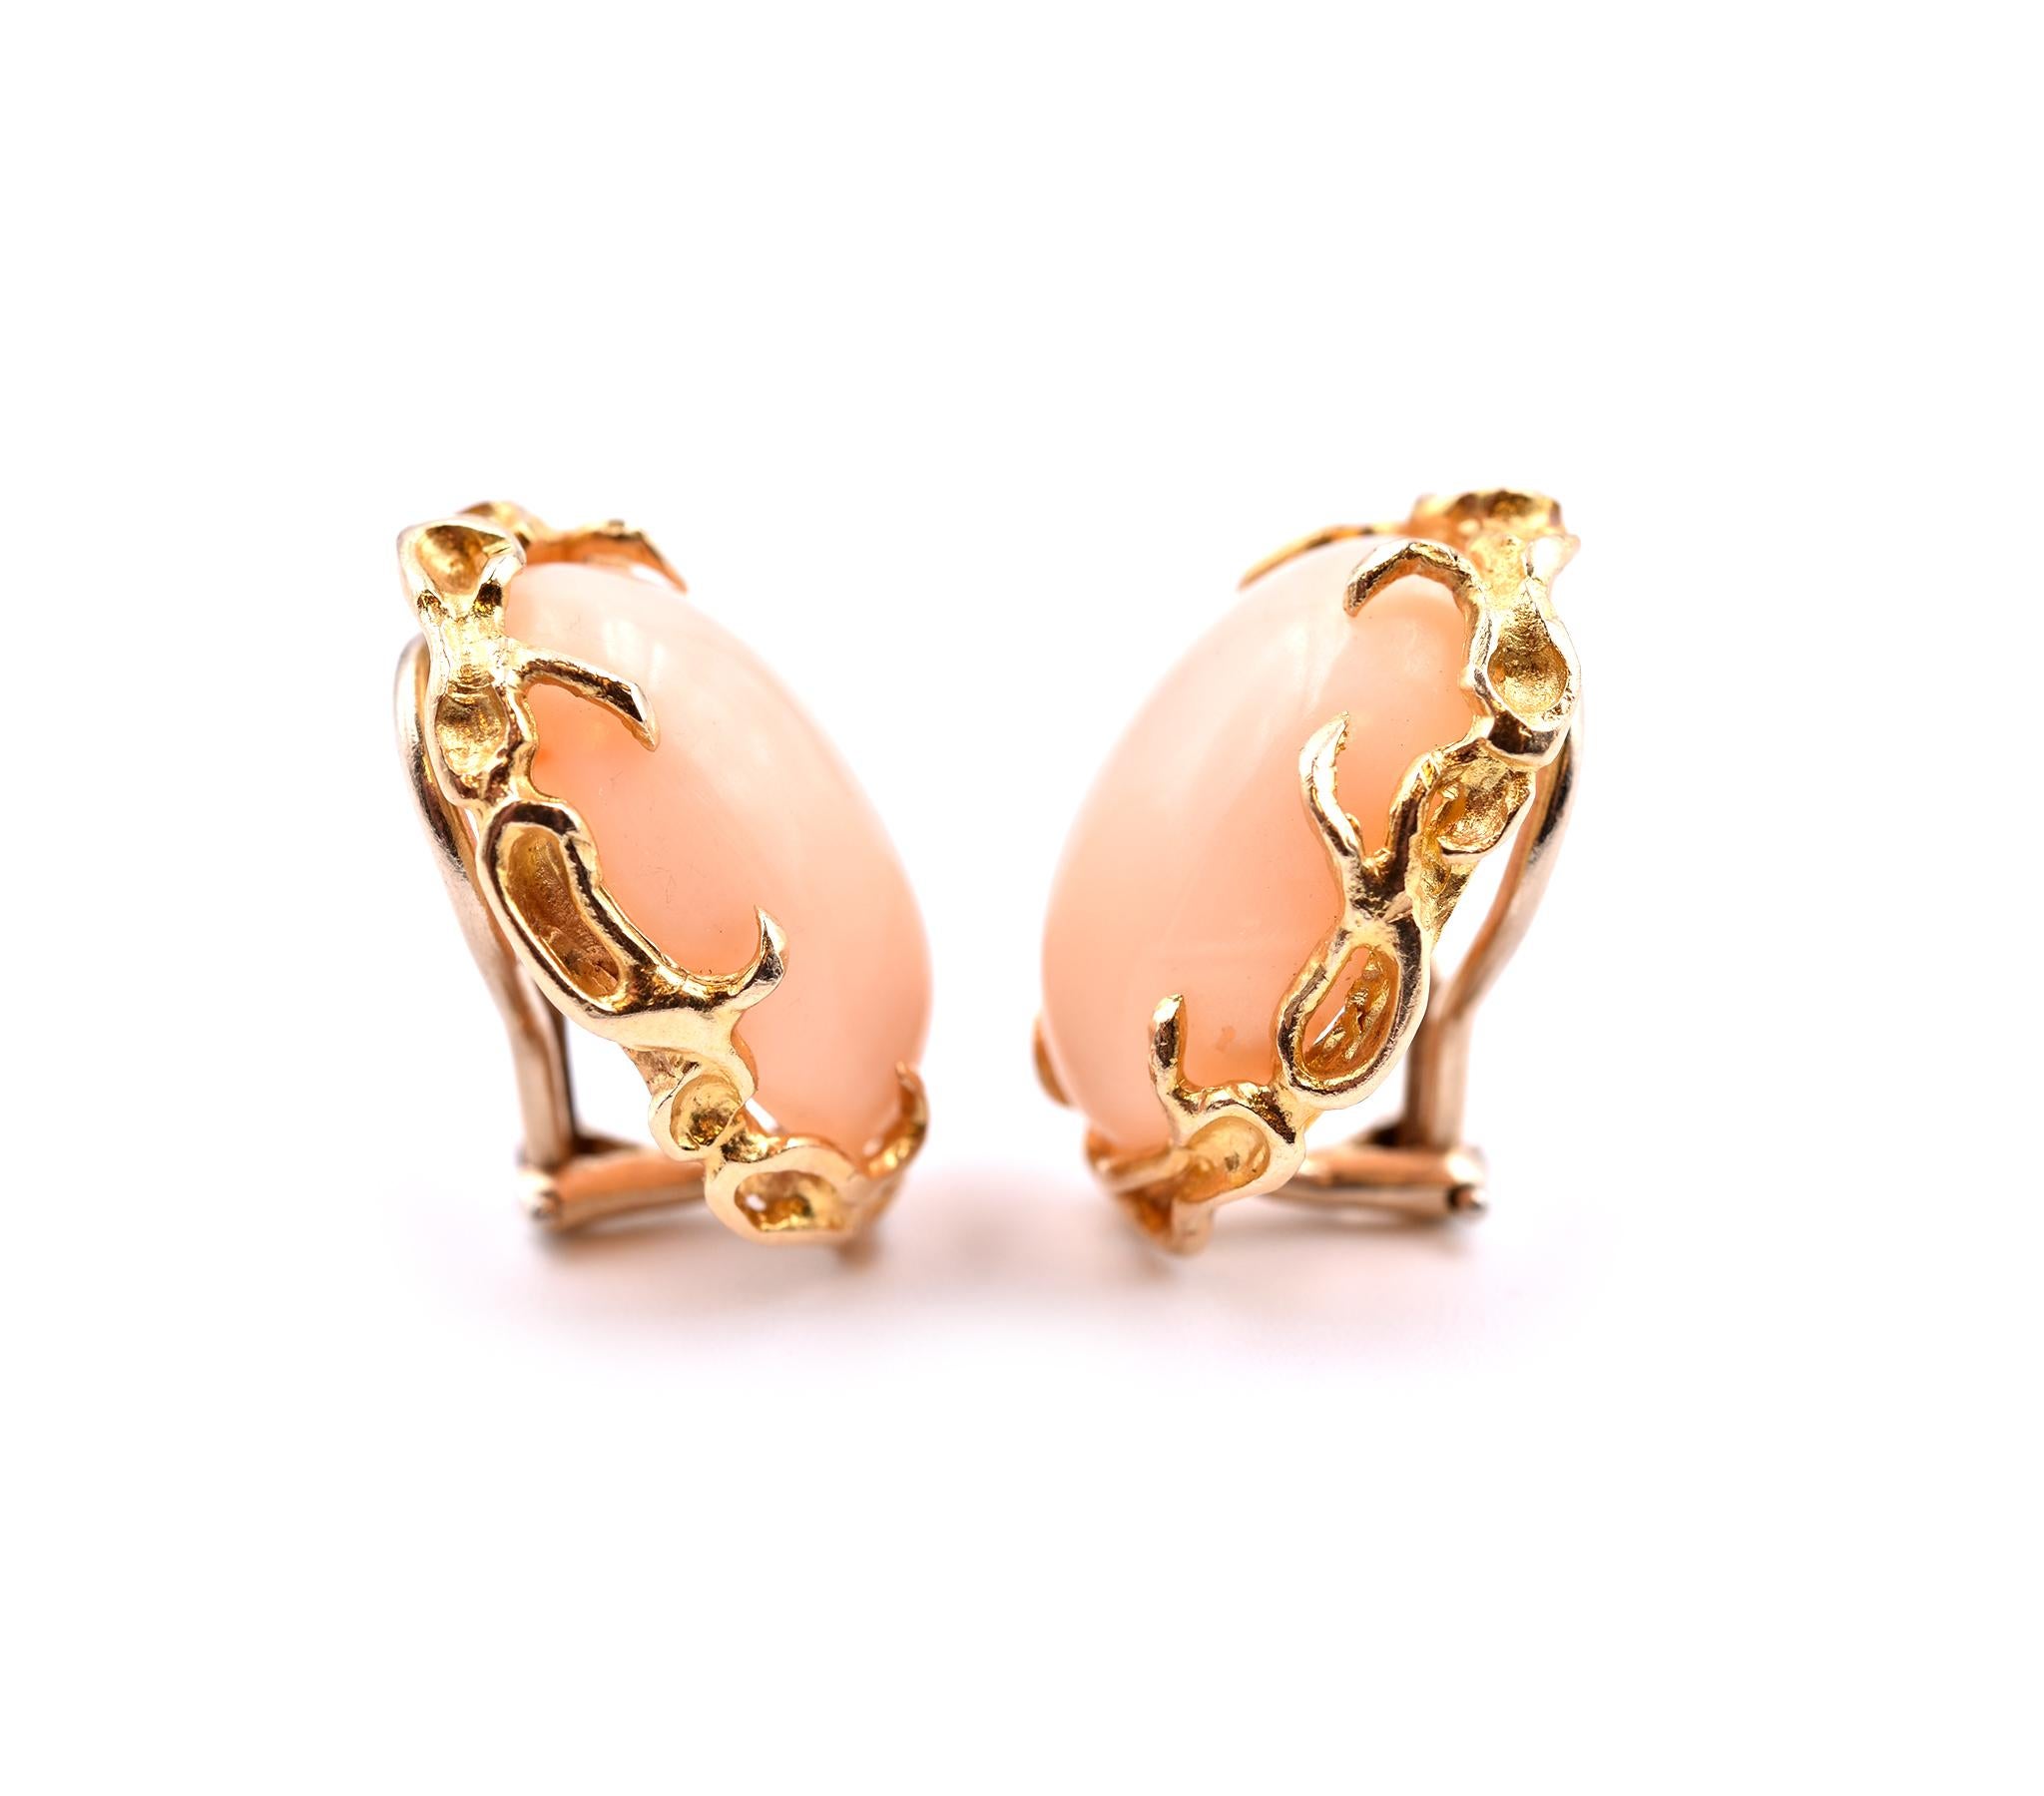 Designer: custom design
Material: 14k yellow gold
Dimensions: earrings measure approximately 22.71mm by 16.84mm
Fastenings: clip-on backs
Weight: 11.28 grams
